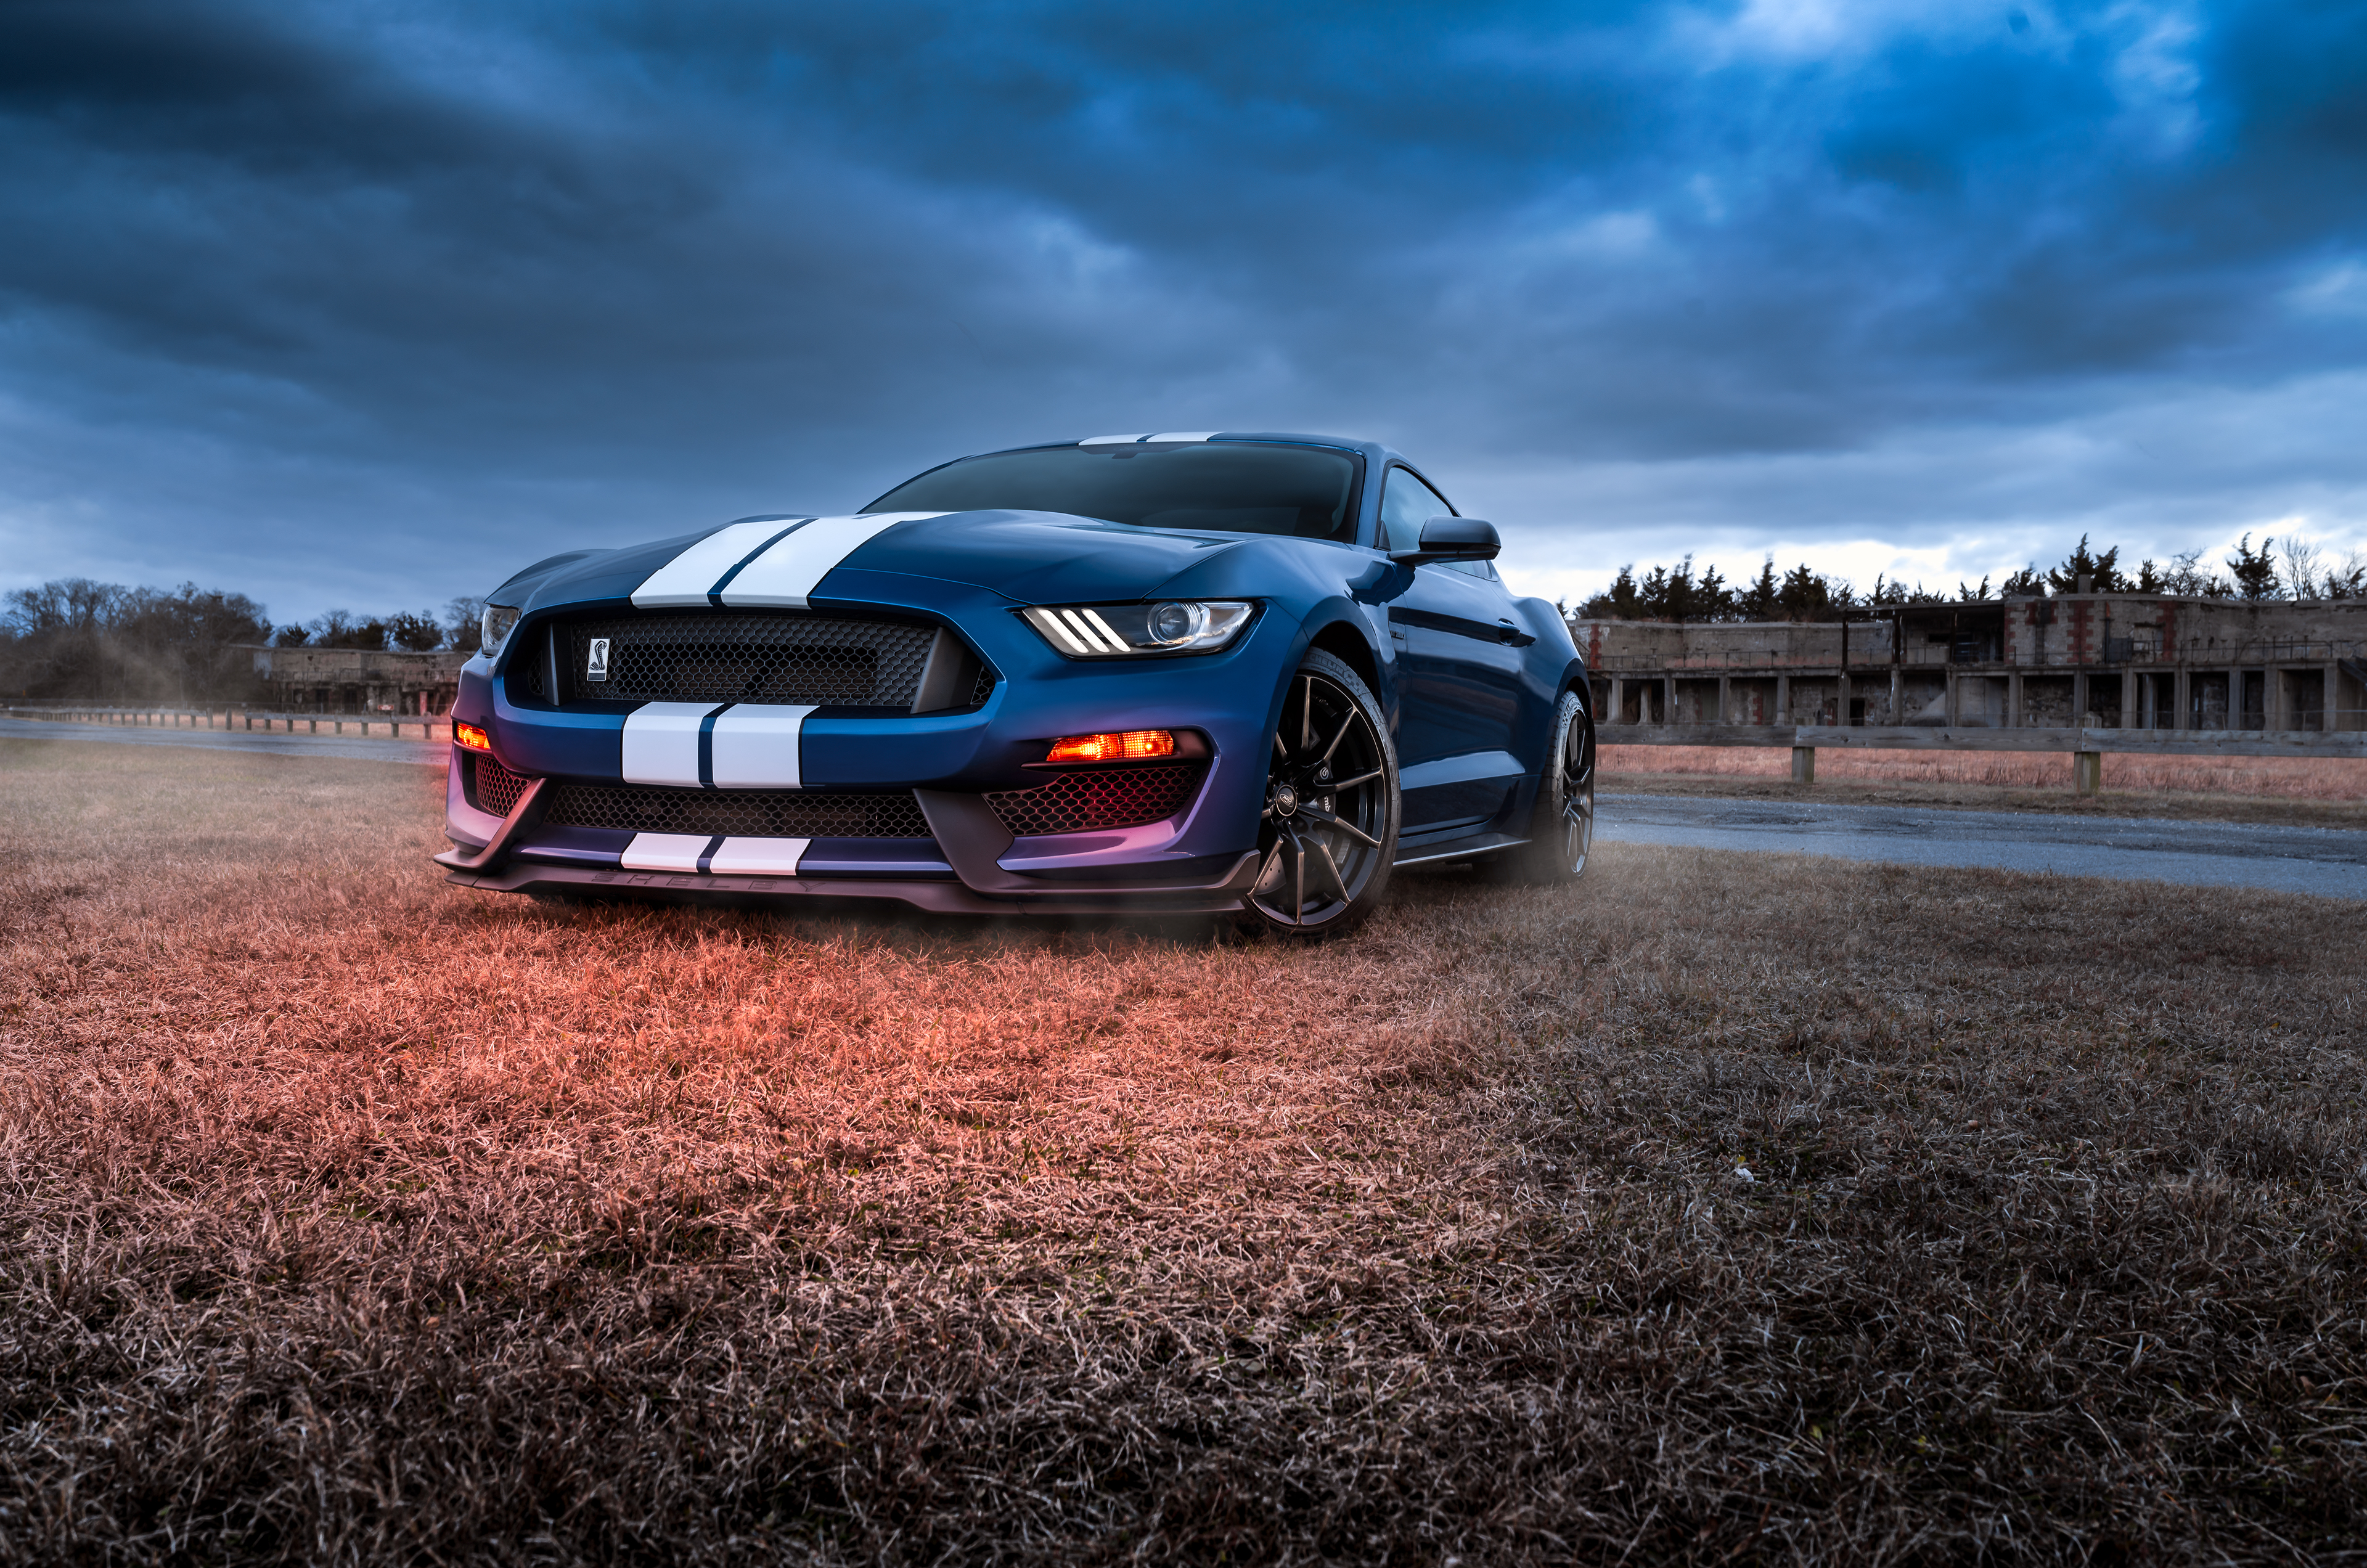 Ford Mustang Shelby GT500 Wallpaper 4K, Muscle cars, Cars, #2718